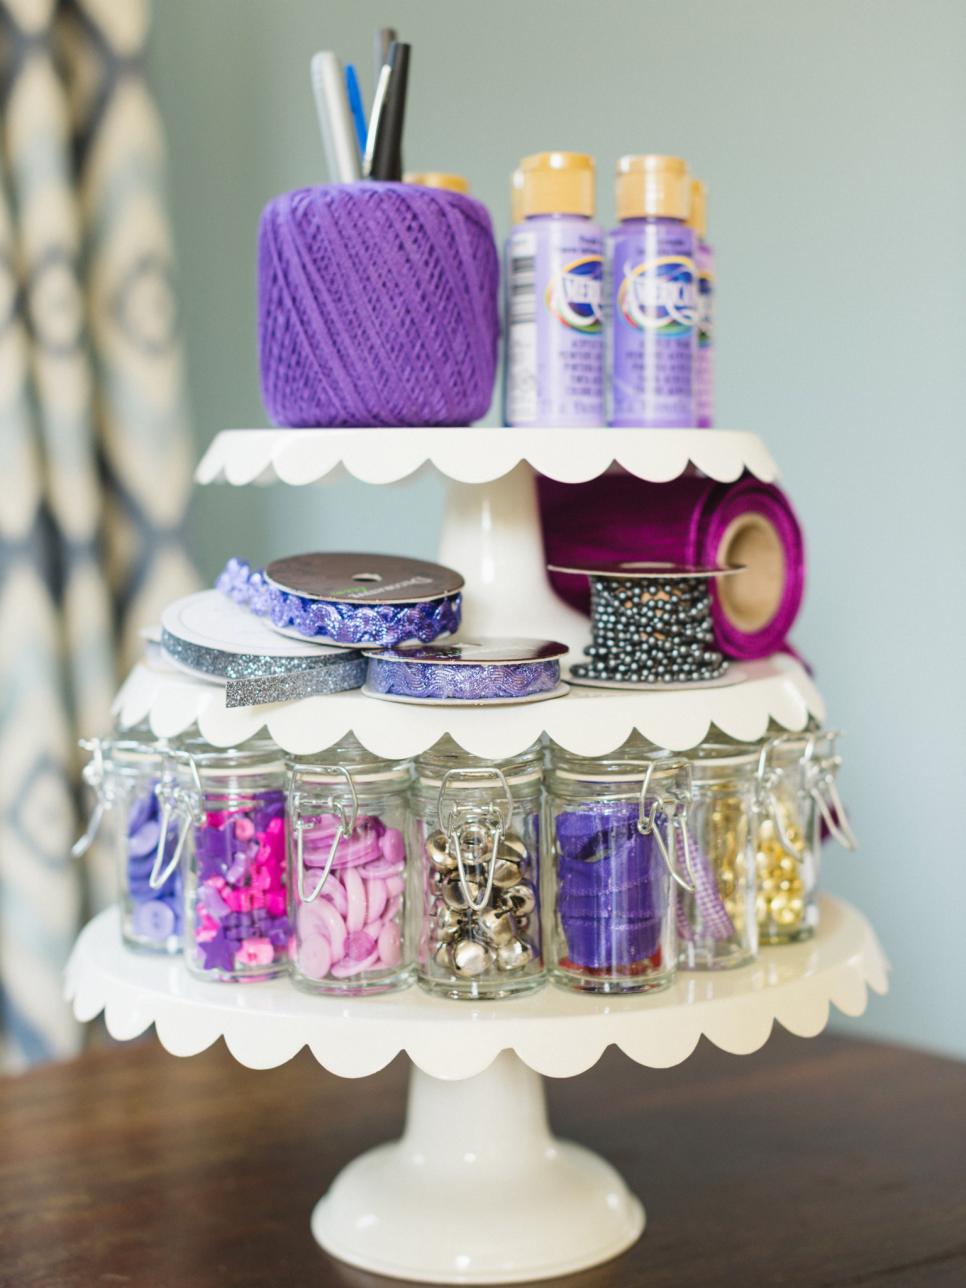 3 tier cake stand covered in wool, jars or glitter and other arts and crafts materials 